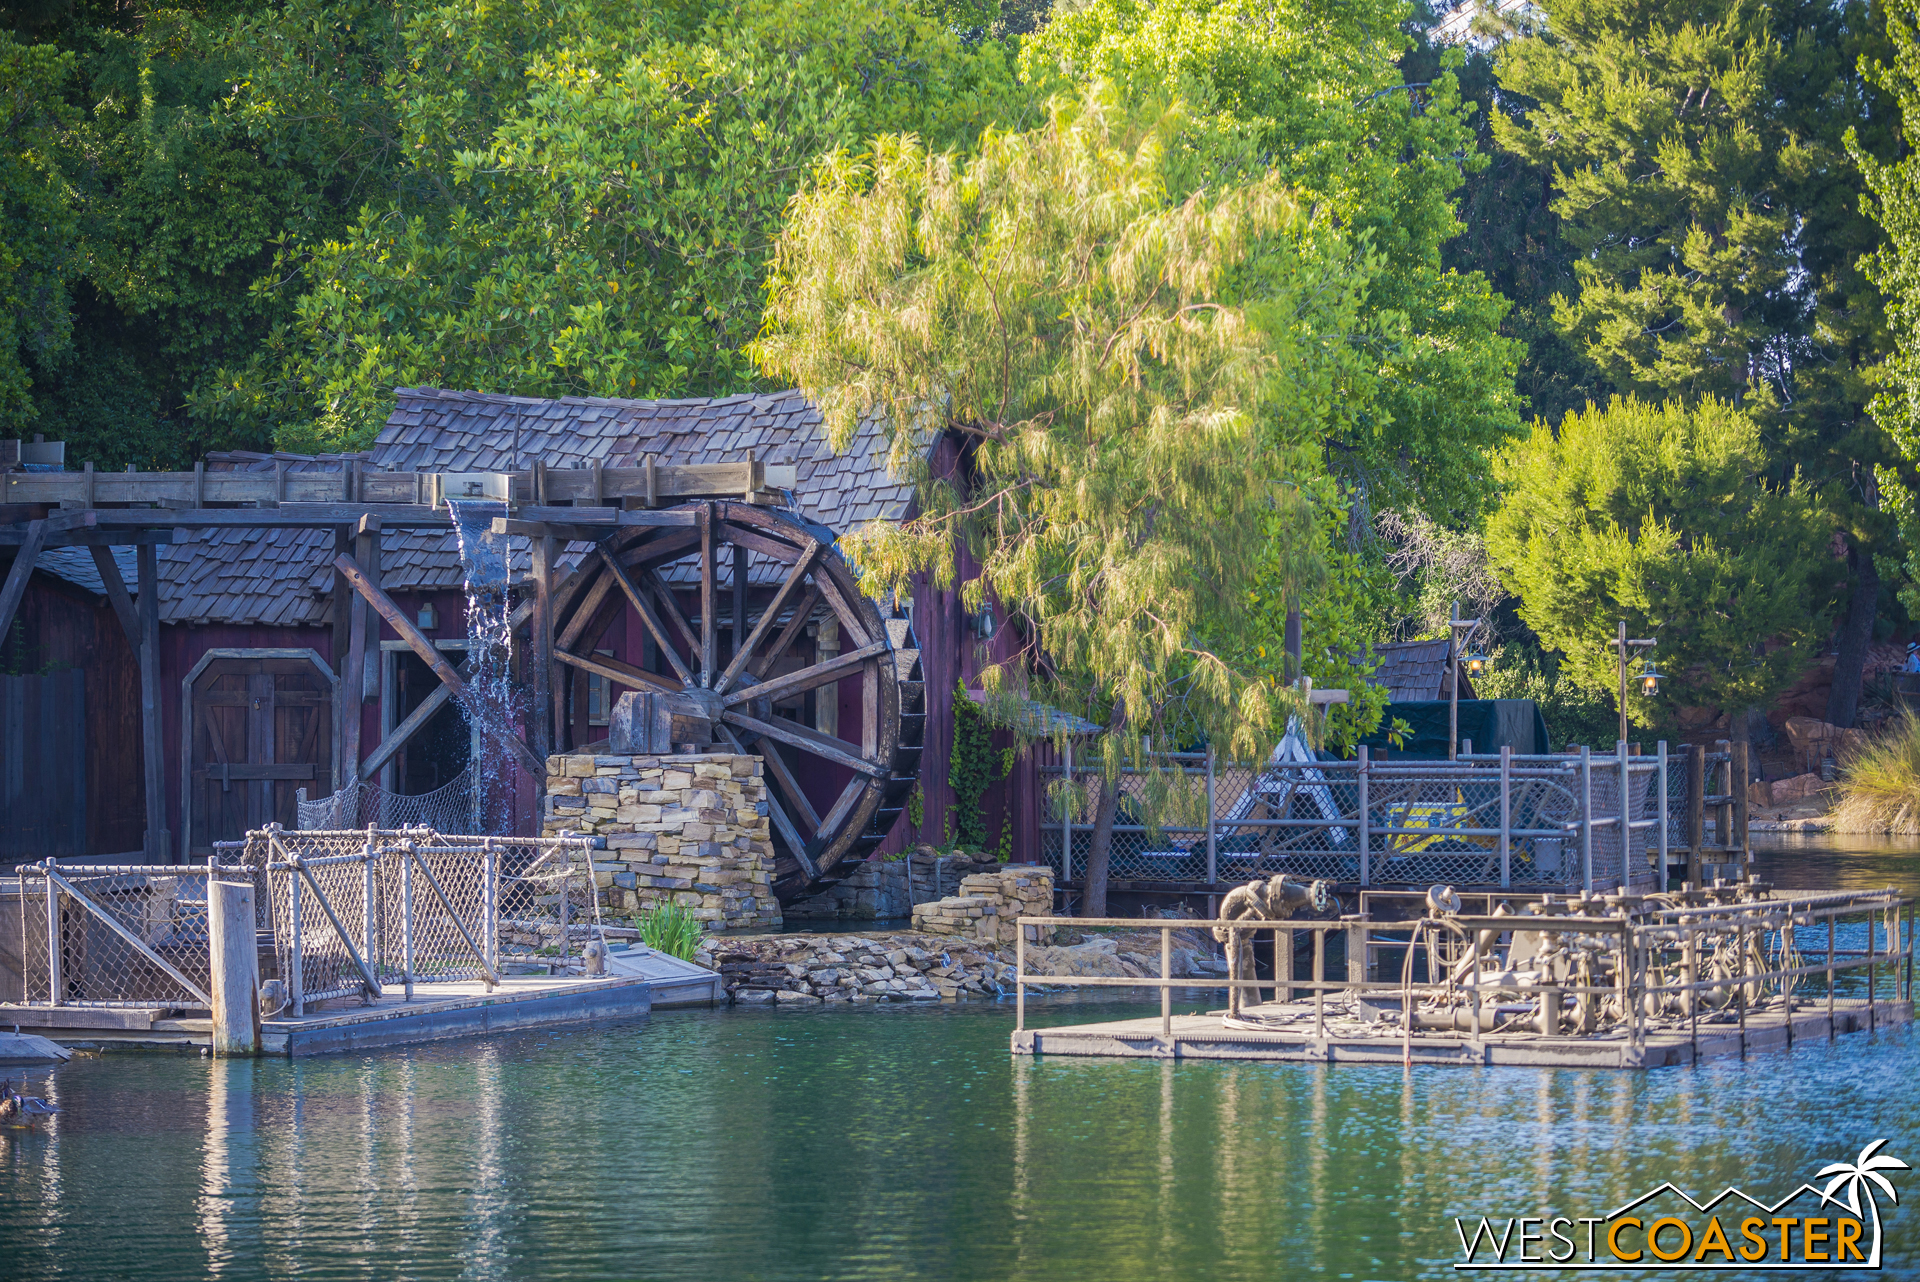  The water wheel to the right was also running. 